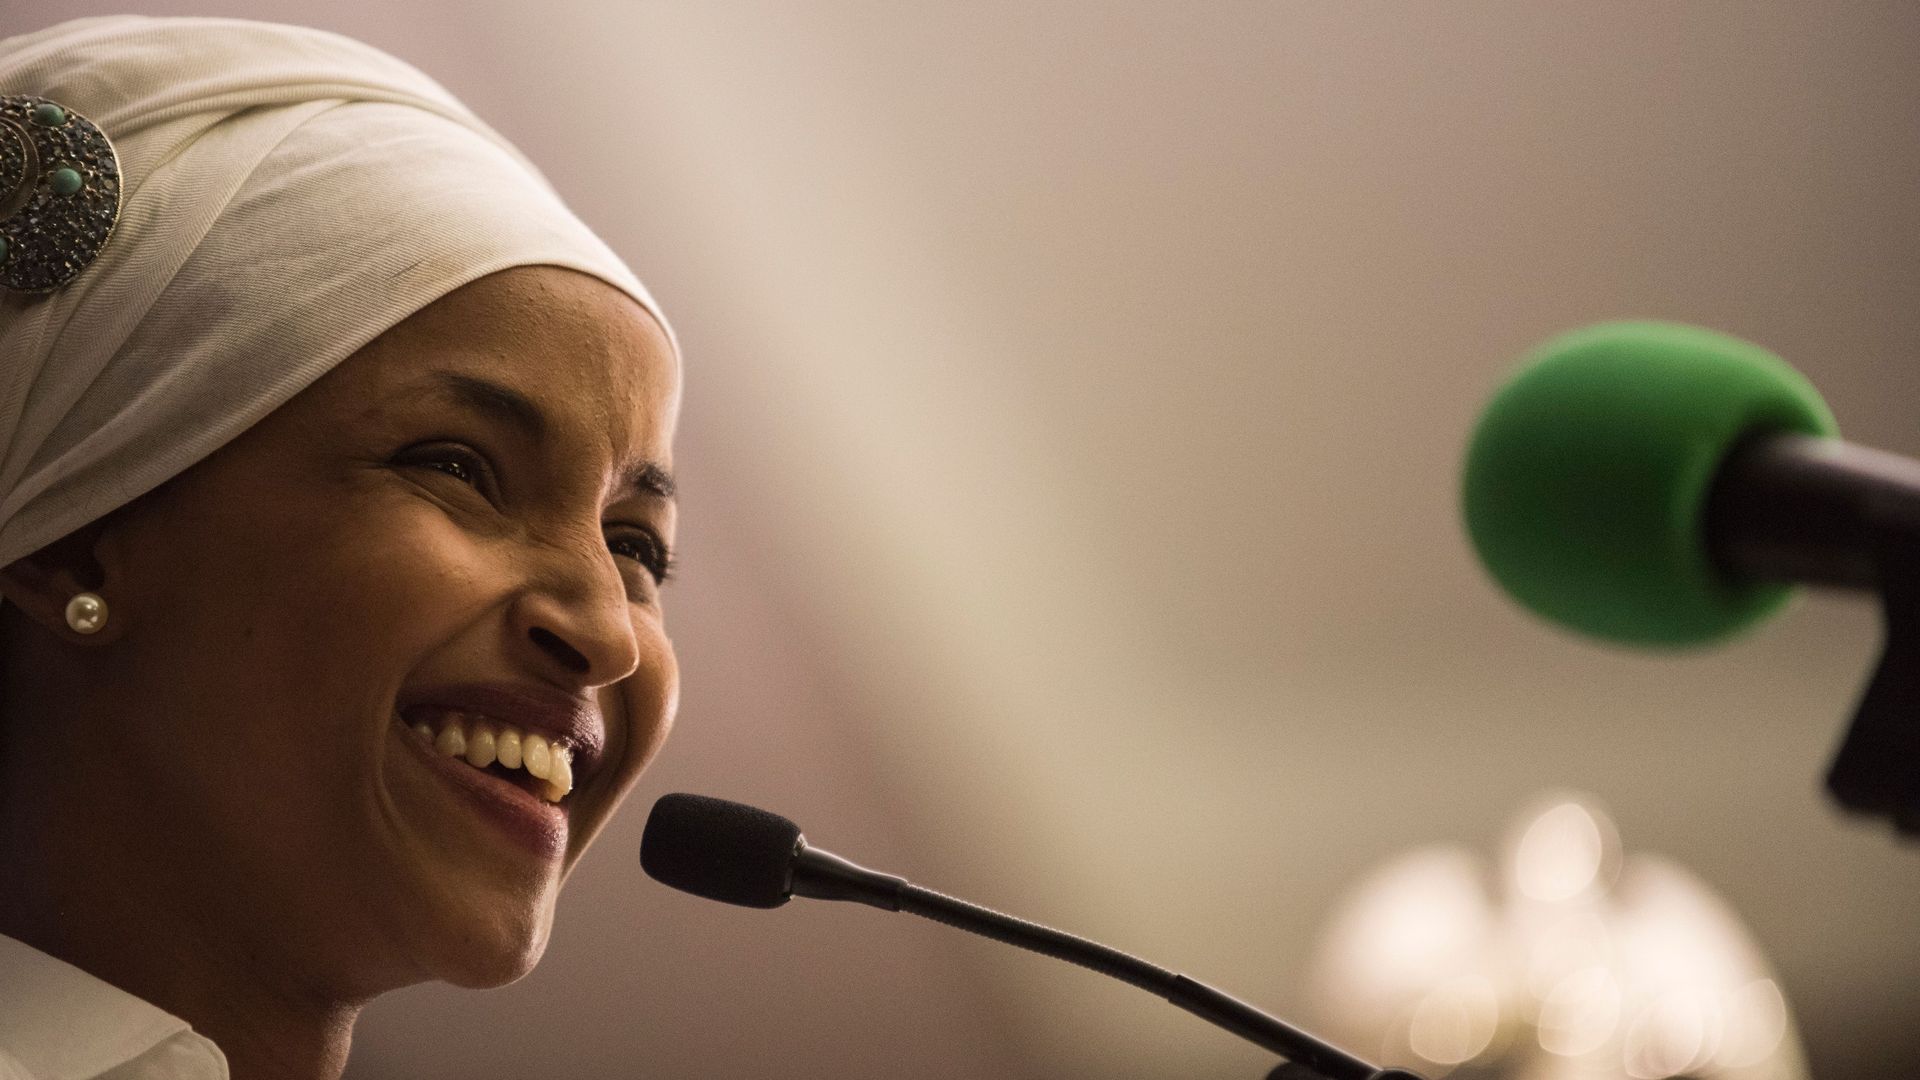 Ilhan Omar smiling at a microphone.